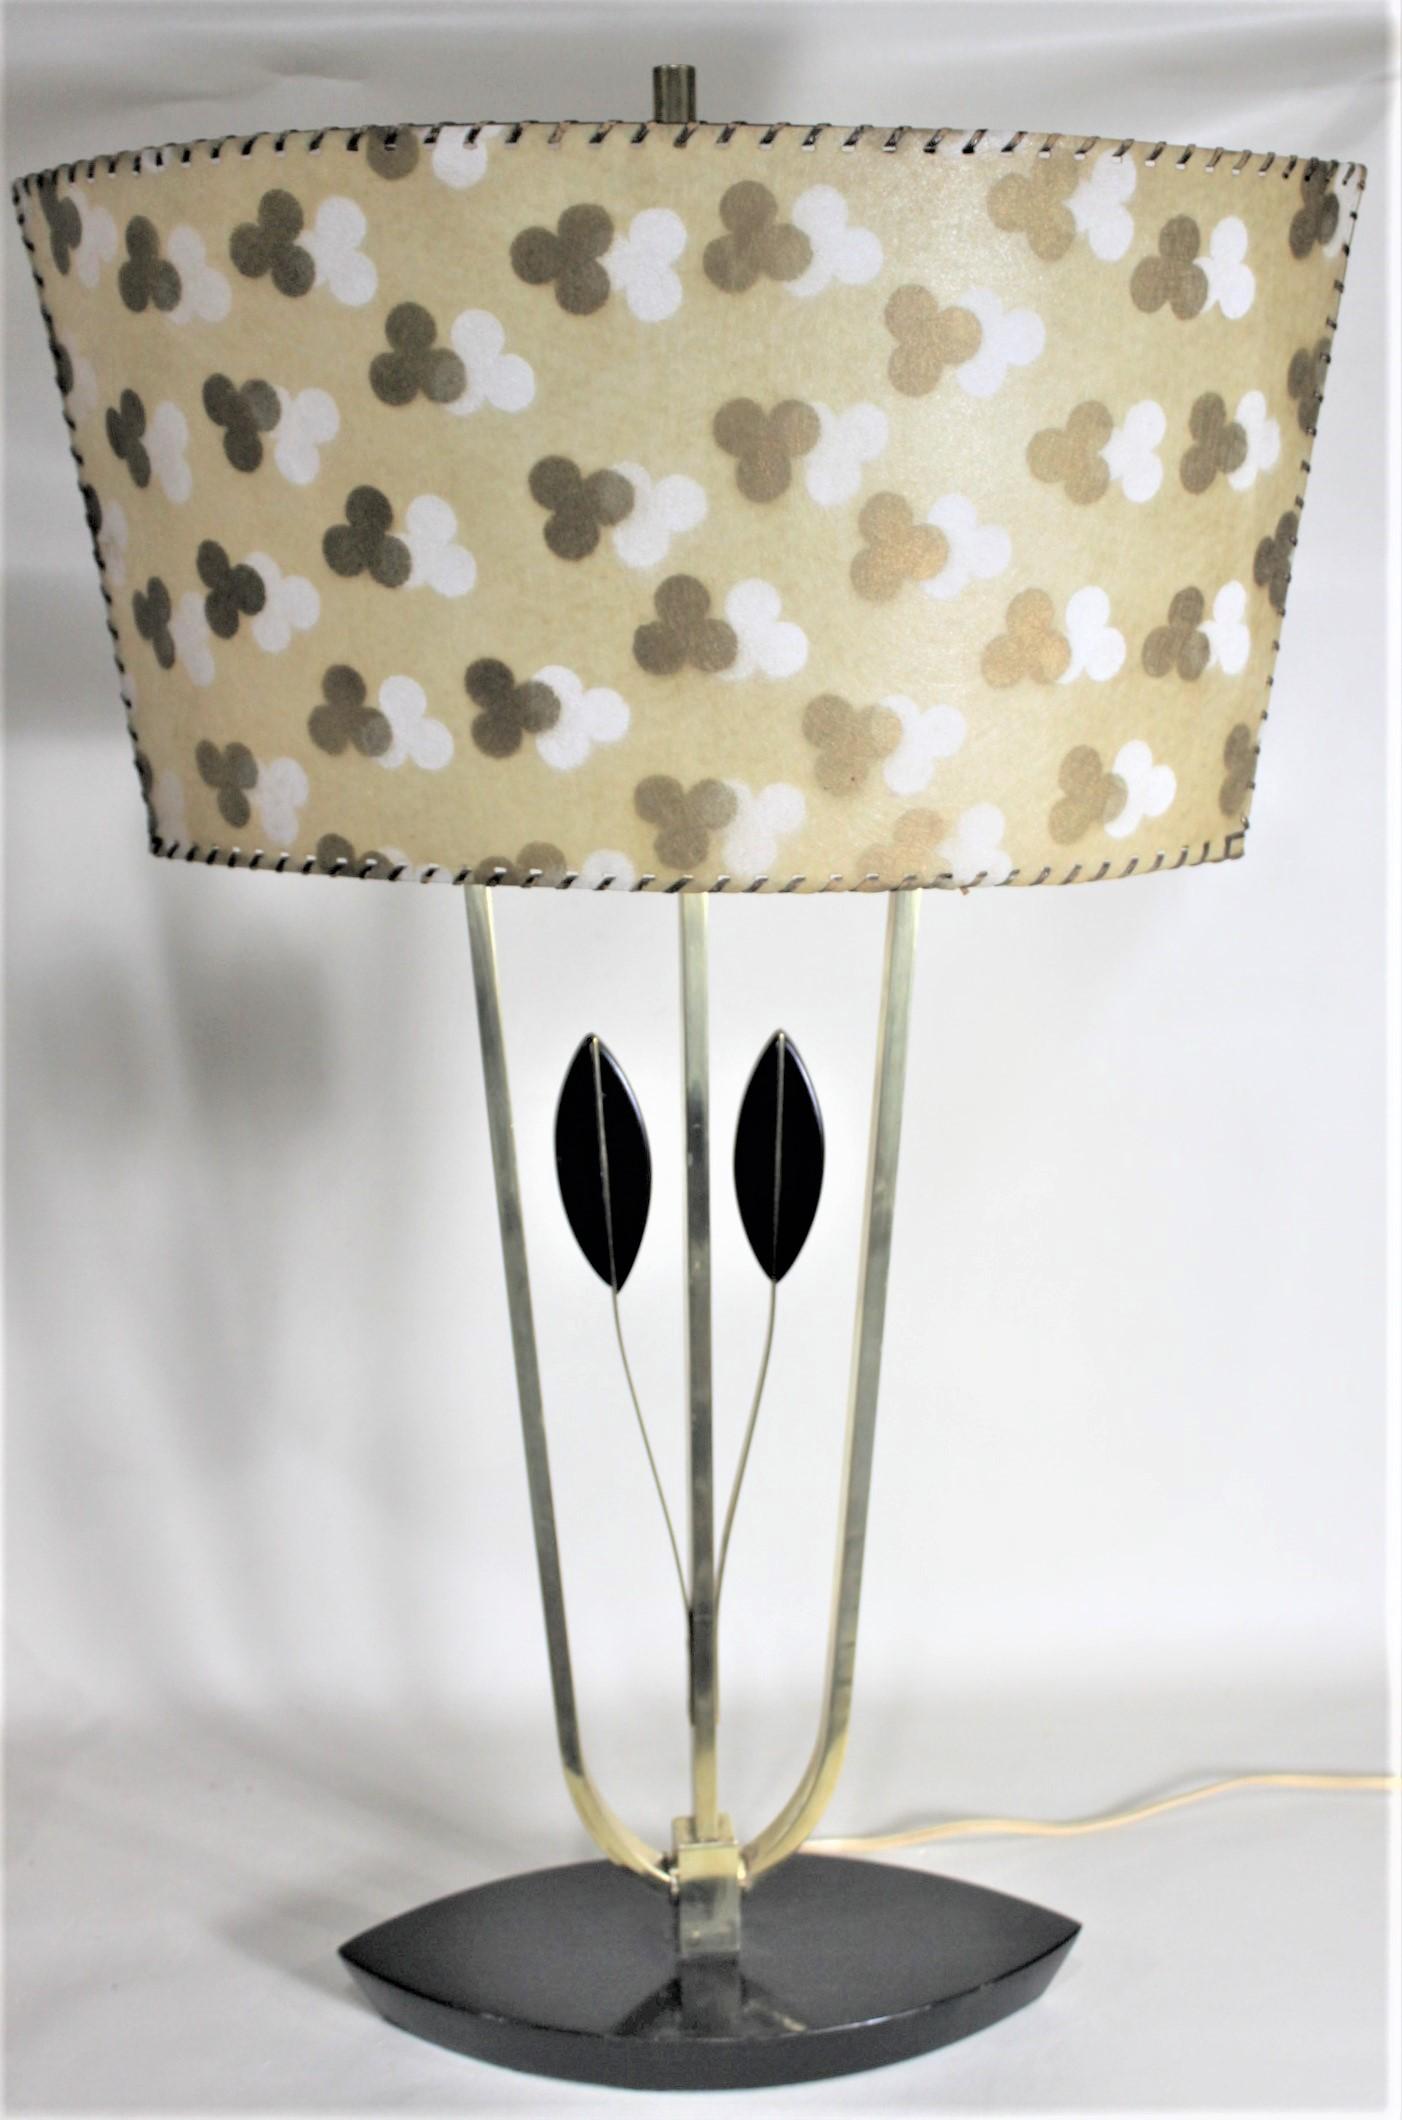 Mid-Century Modern Rembrandt Styled Table Lamp with Patterned Fiberene Shade 7